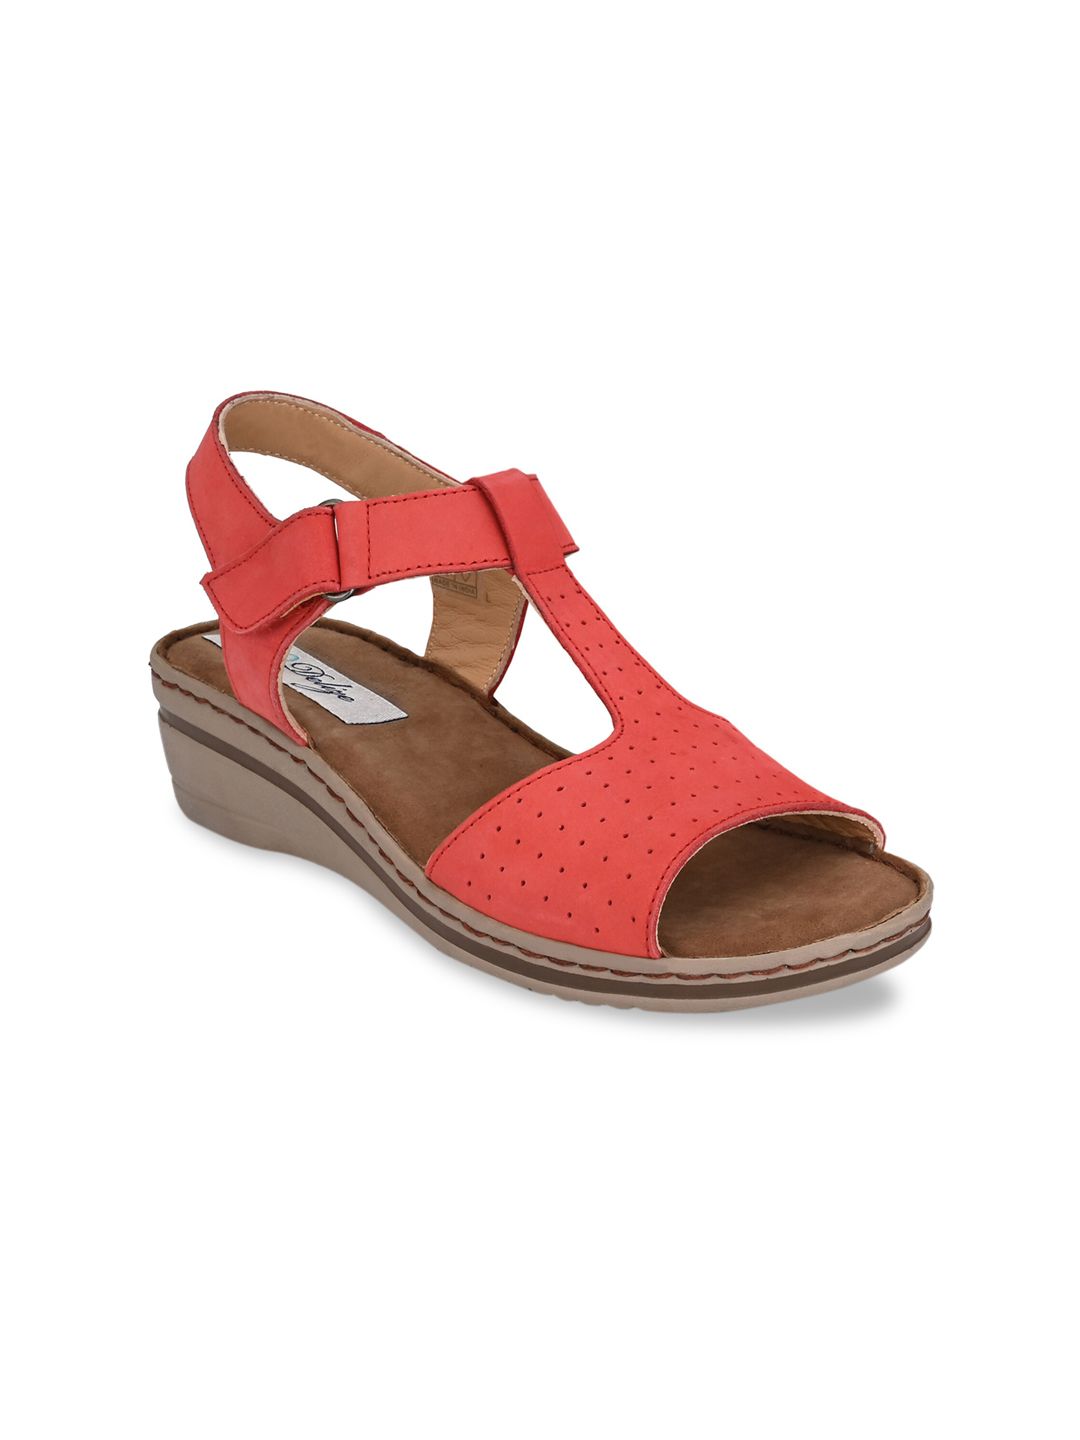 Delize Red Perforated Leather Wedge Sandals Price in India